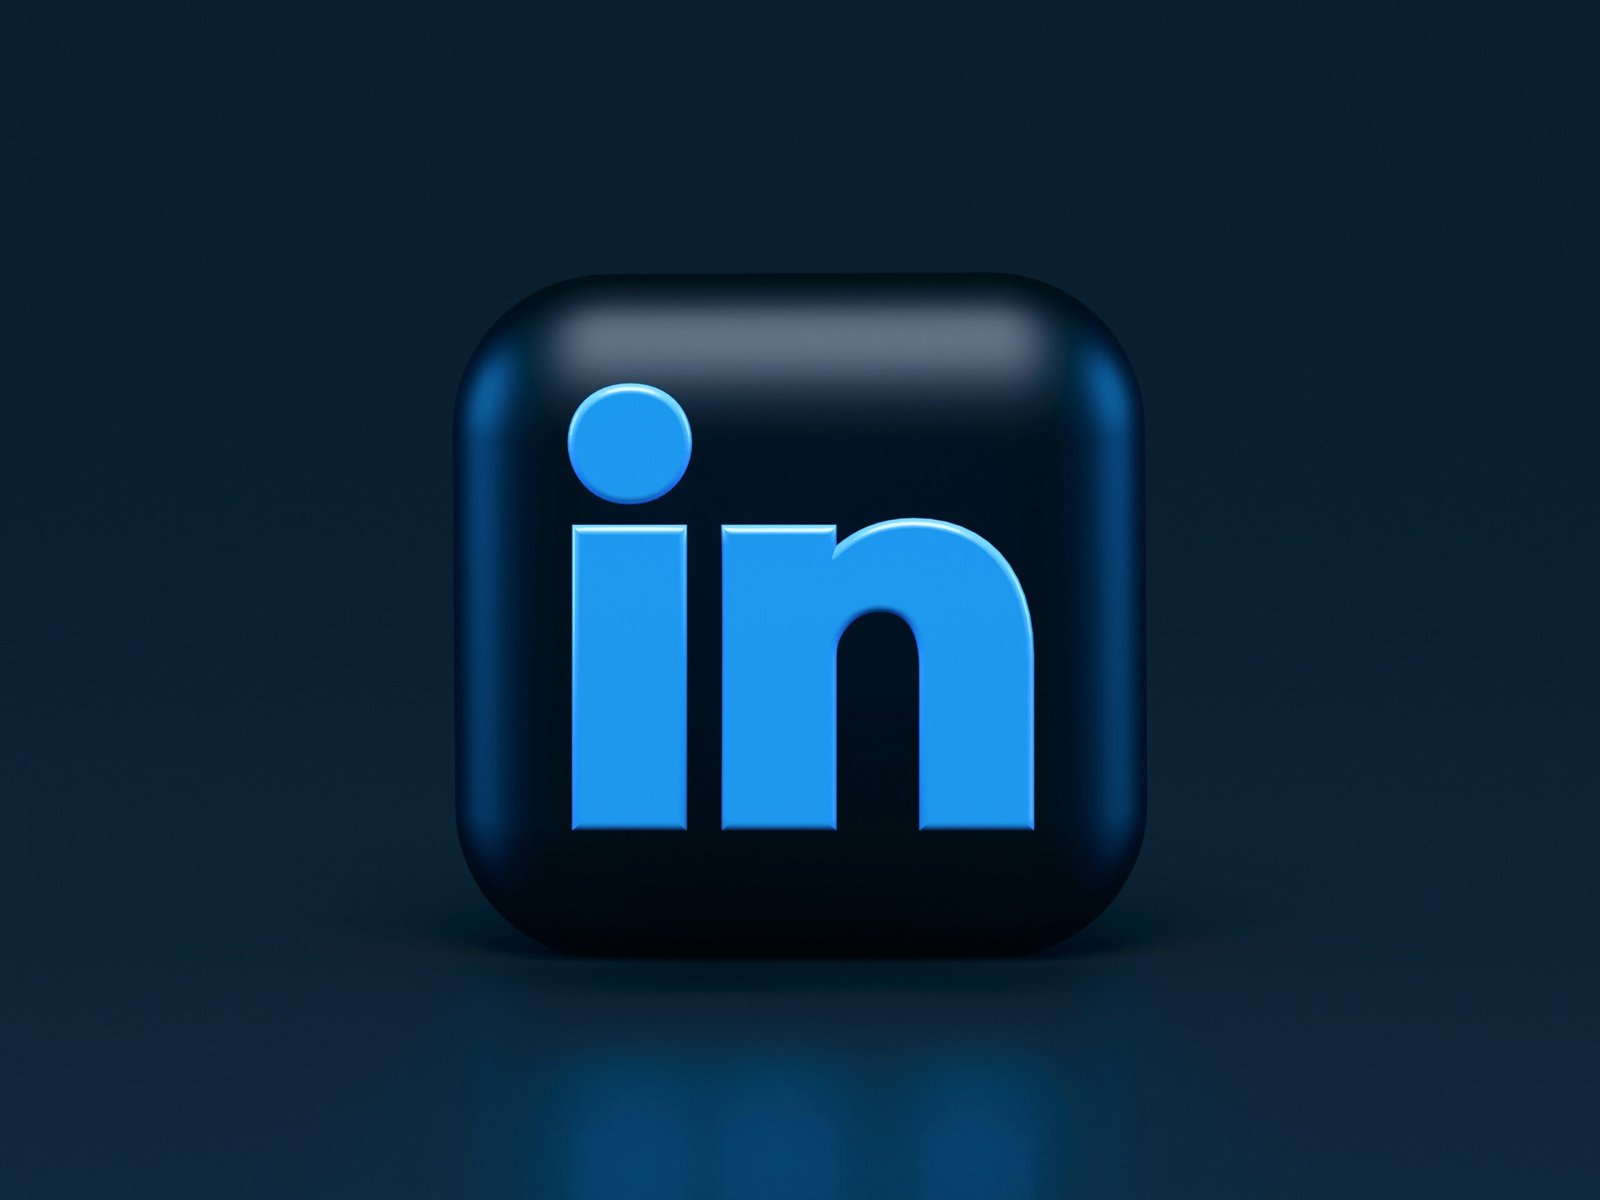 How to Get the “Top Voice” Badge on LinkedIn